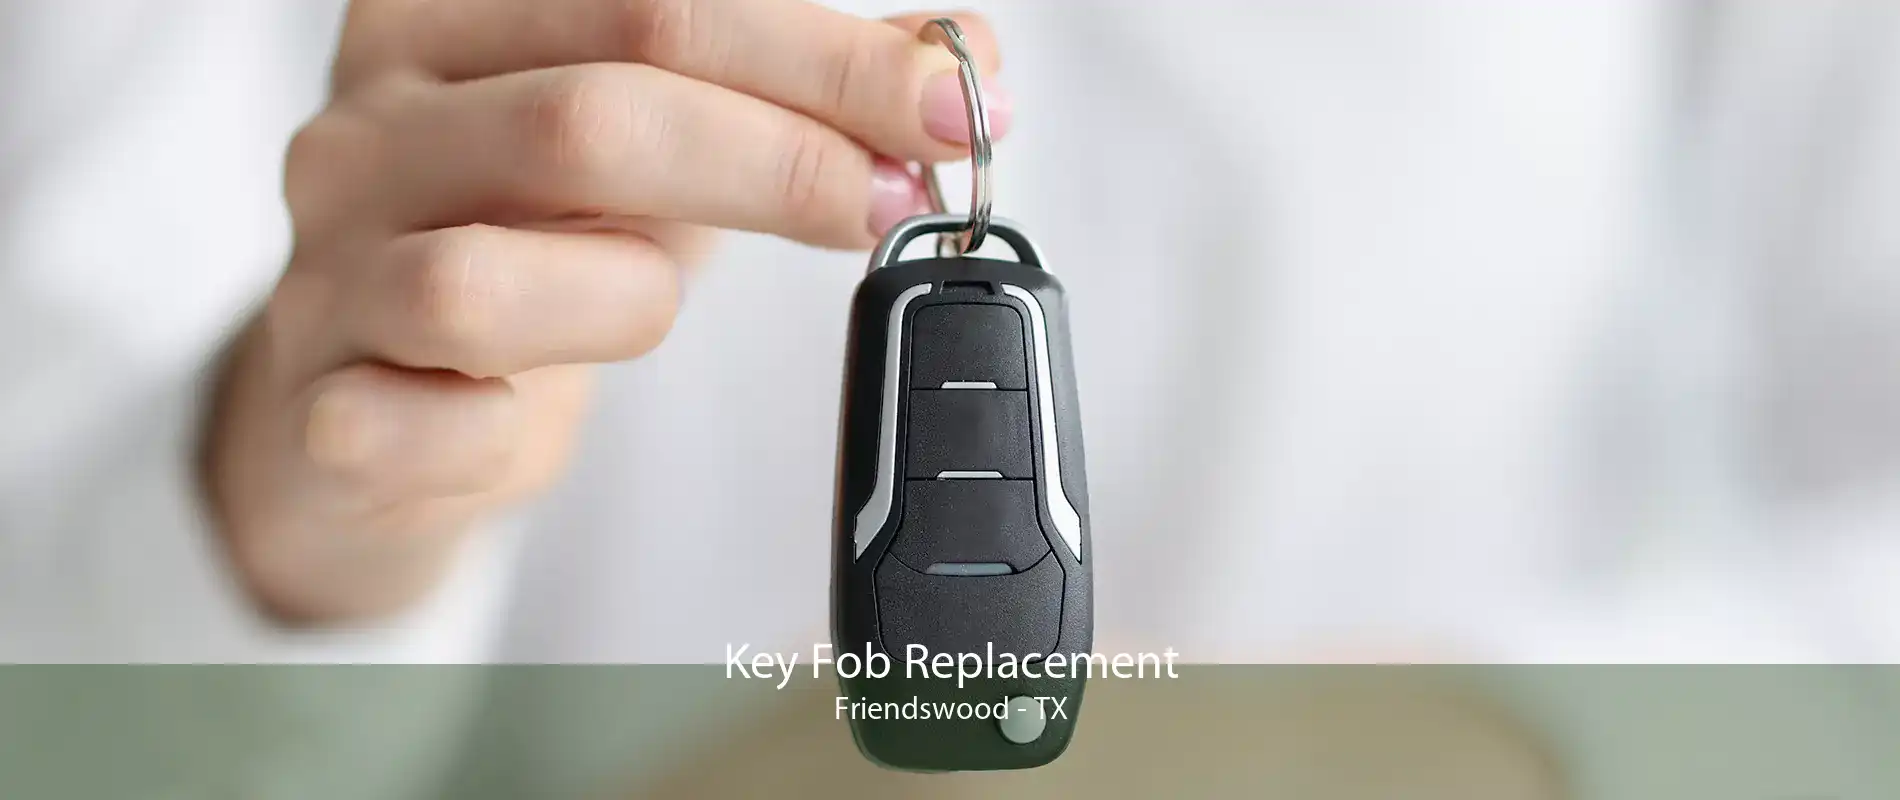 Key Fob Replacement Friendswood - TX